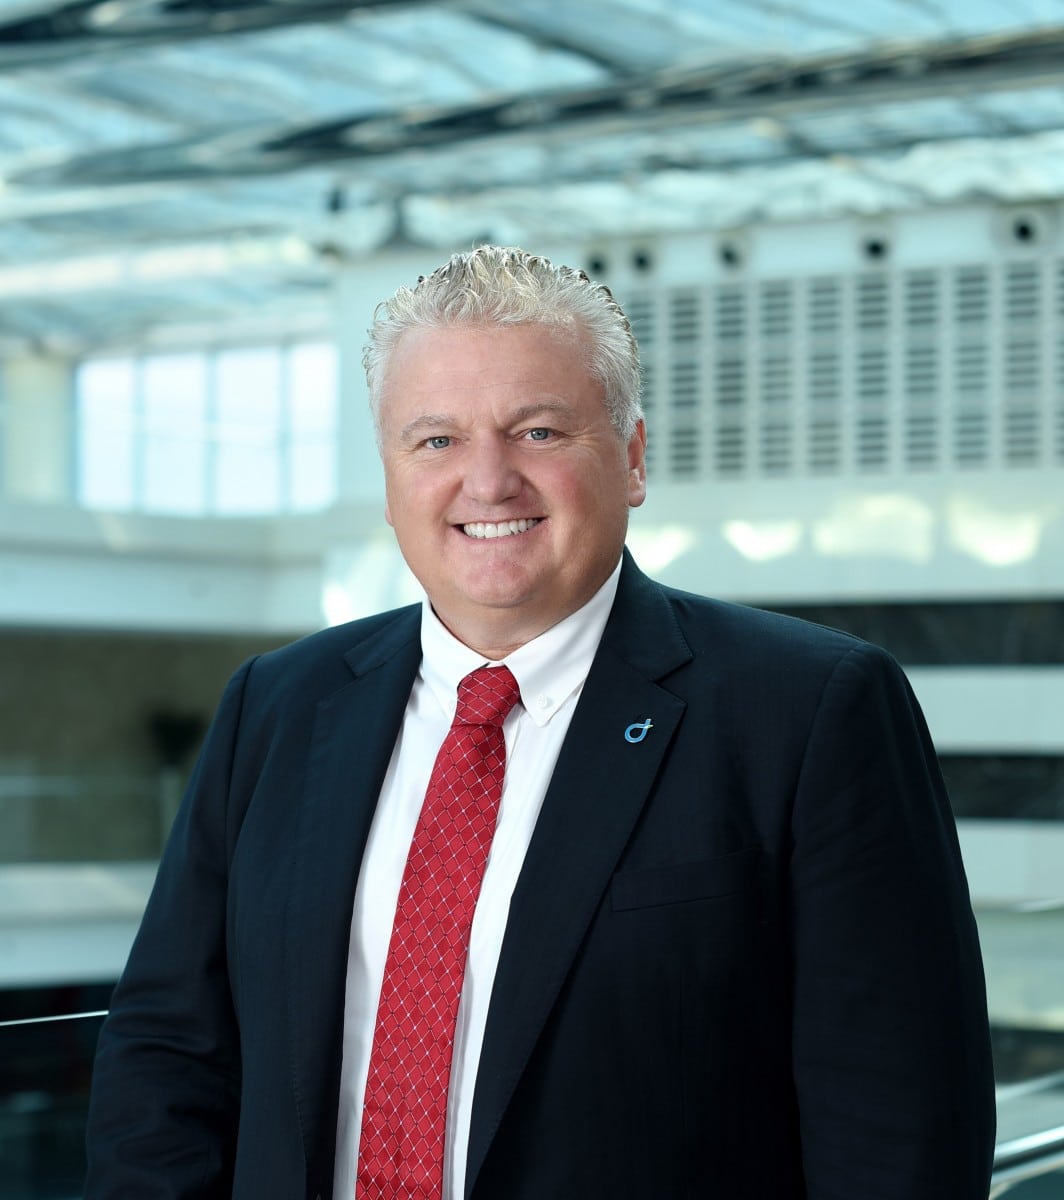 Barker rises to DSVP for airport operations at dnata